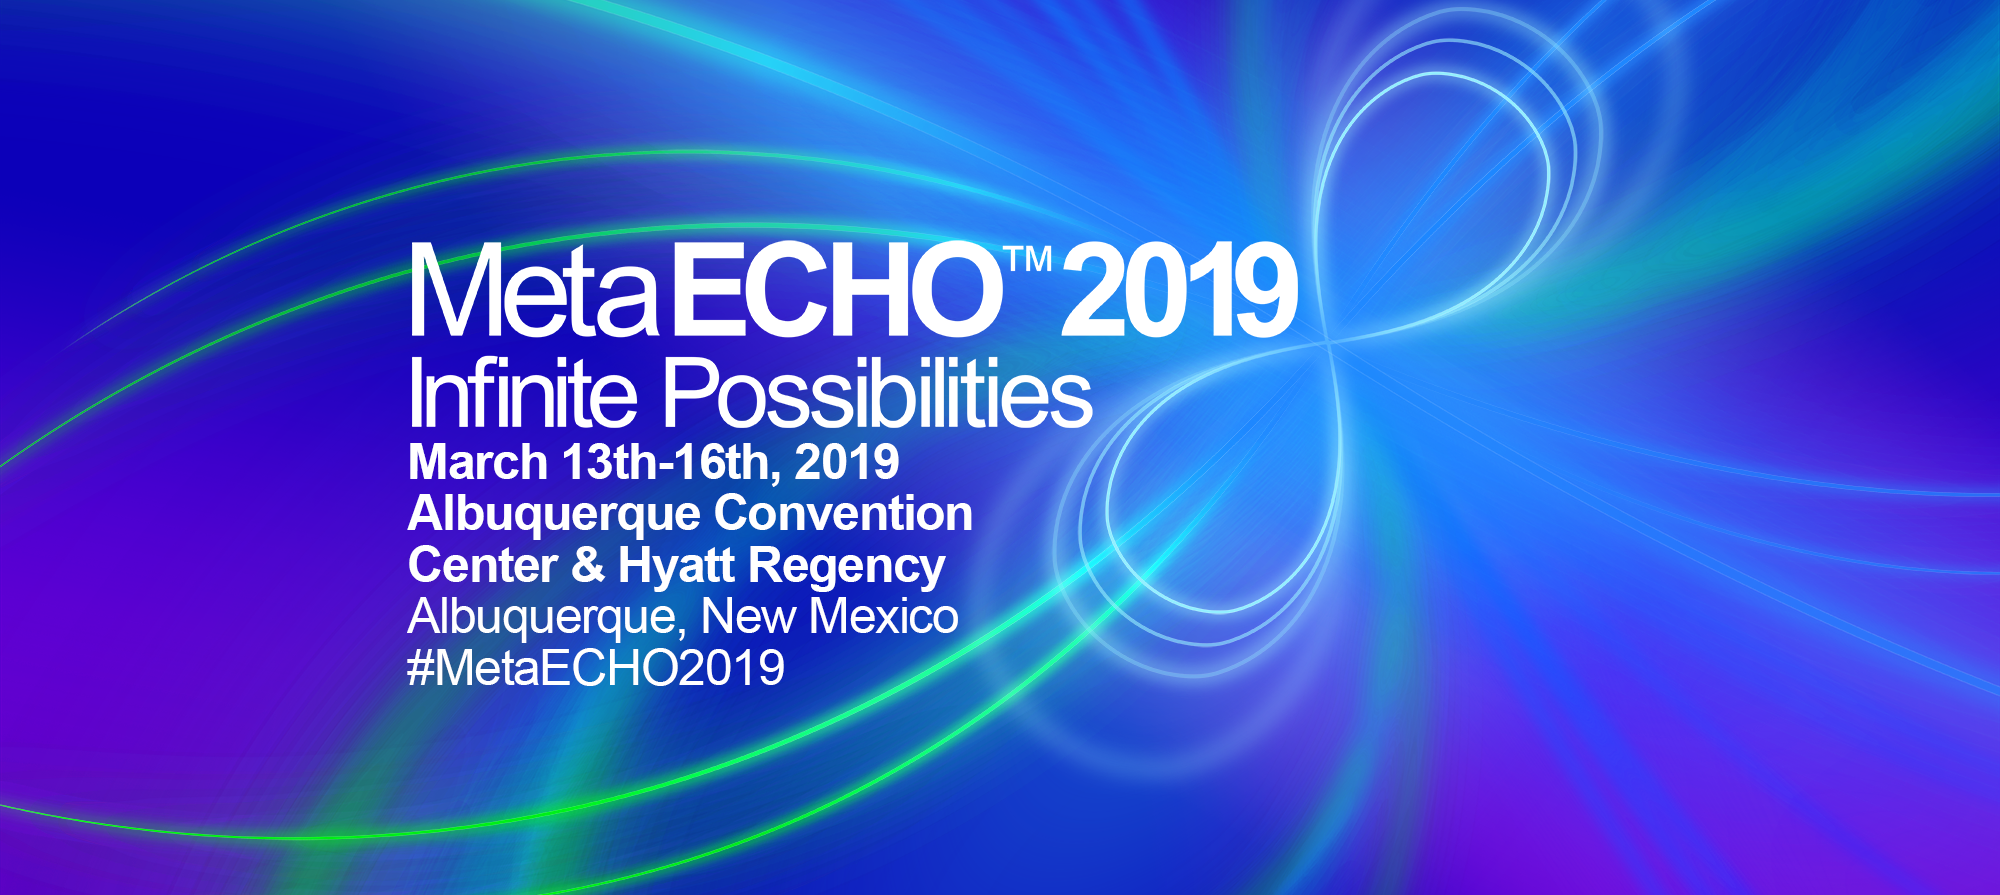 2019 MetaECHO Conference Project ECHO